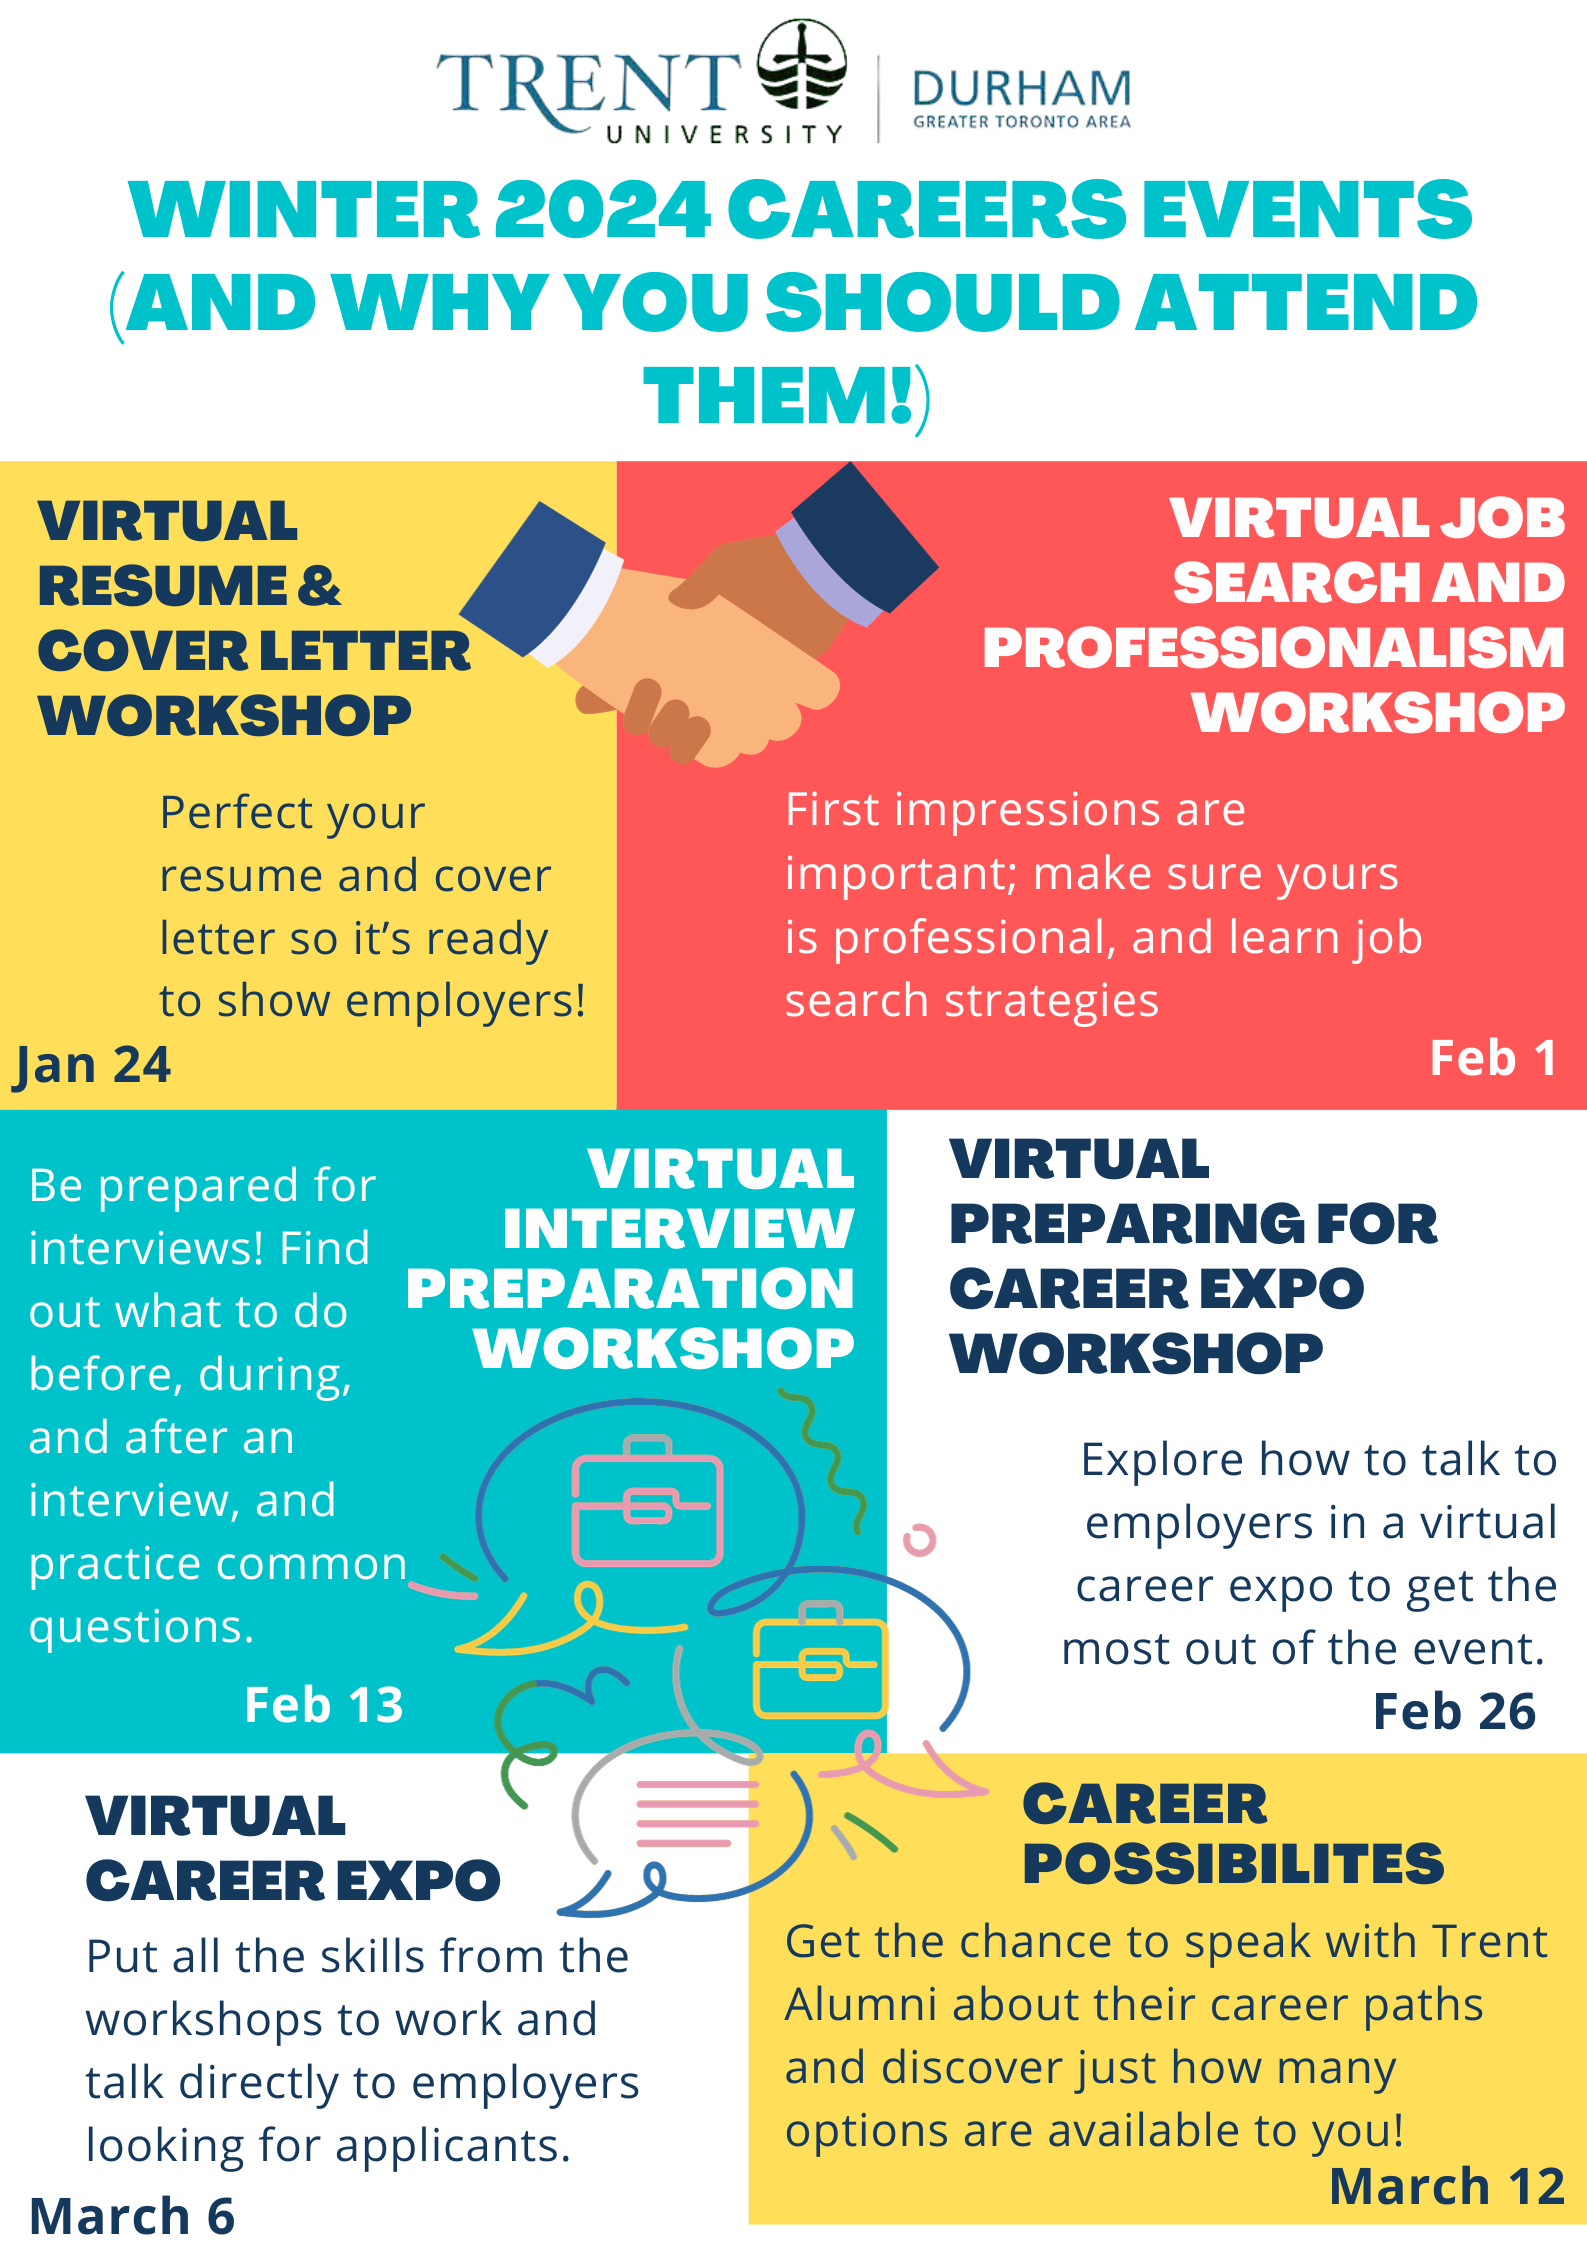 Poster for Wimter 2024 Careers Events and why you should attend them! Virtual resume and cover letter, virtual job search and professionalism workshop, virtual interview preparation workshop, virtual preparing for career expo workshop, virtual career expo, career possibilities event, all details provided in posters below